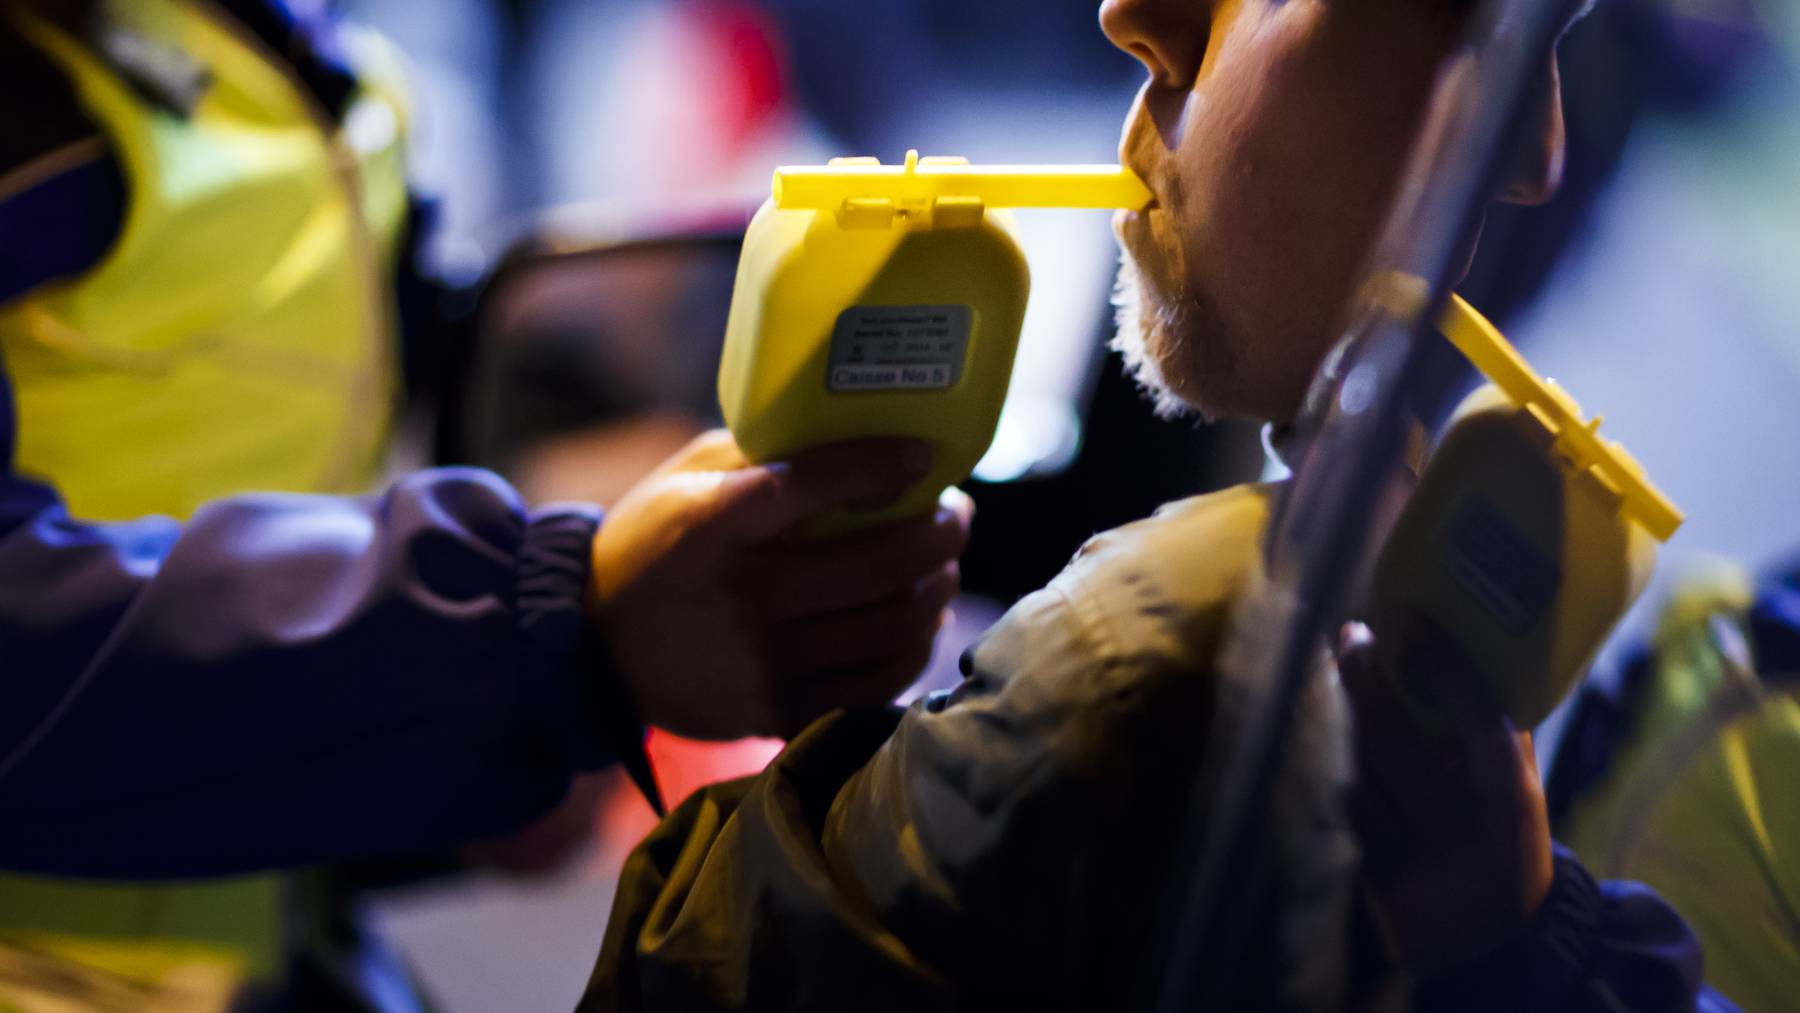 Blaufahrt_Alkoholtest_Polizeikontrolle-A man blows in a breathalyzer as Geneva police officers and border patrol members control drivers for alcohol and drug consumption, in Perly near Geneva, Thursday, late December 21, 2017. «Nez Rouge», a prevention campaign and driver service that offers to drive people home free of charge when under influence, aims to raise awareness on their services by joining the police on this control as Christmas and New-Year celebrations approach.